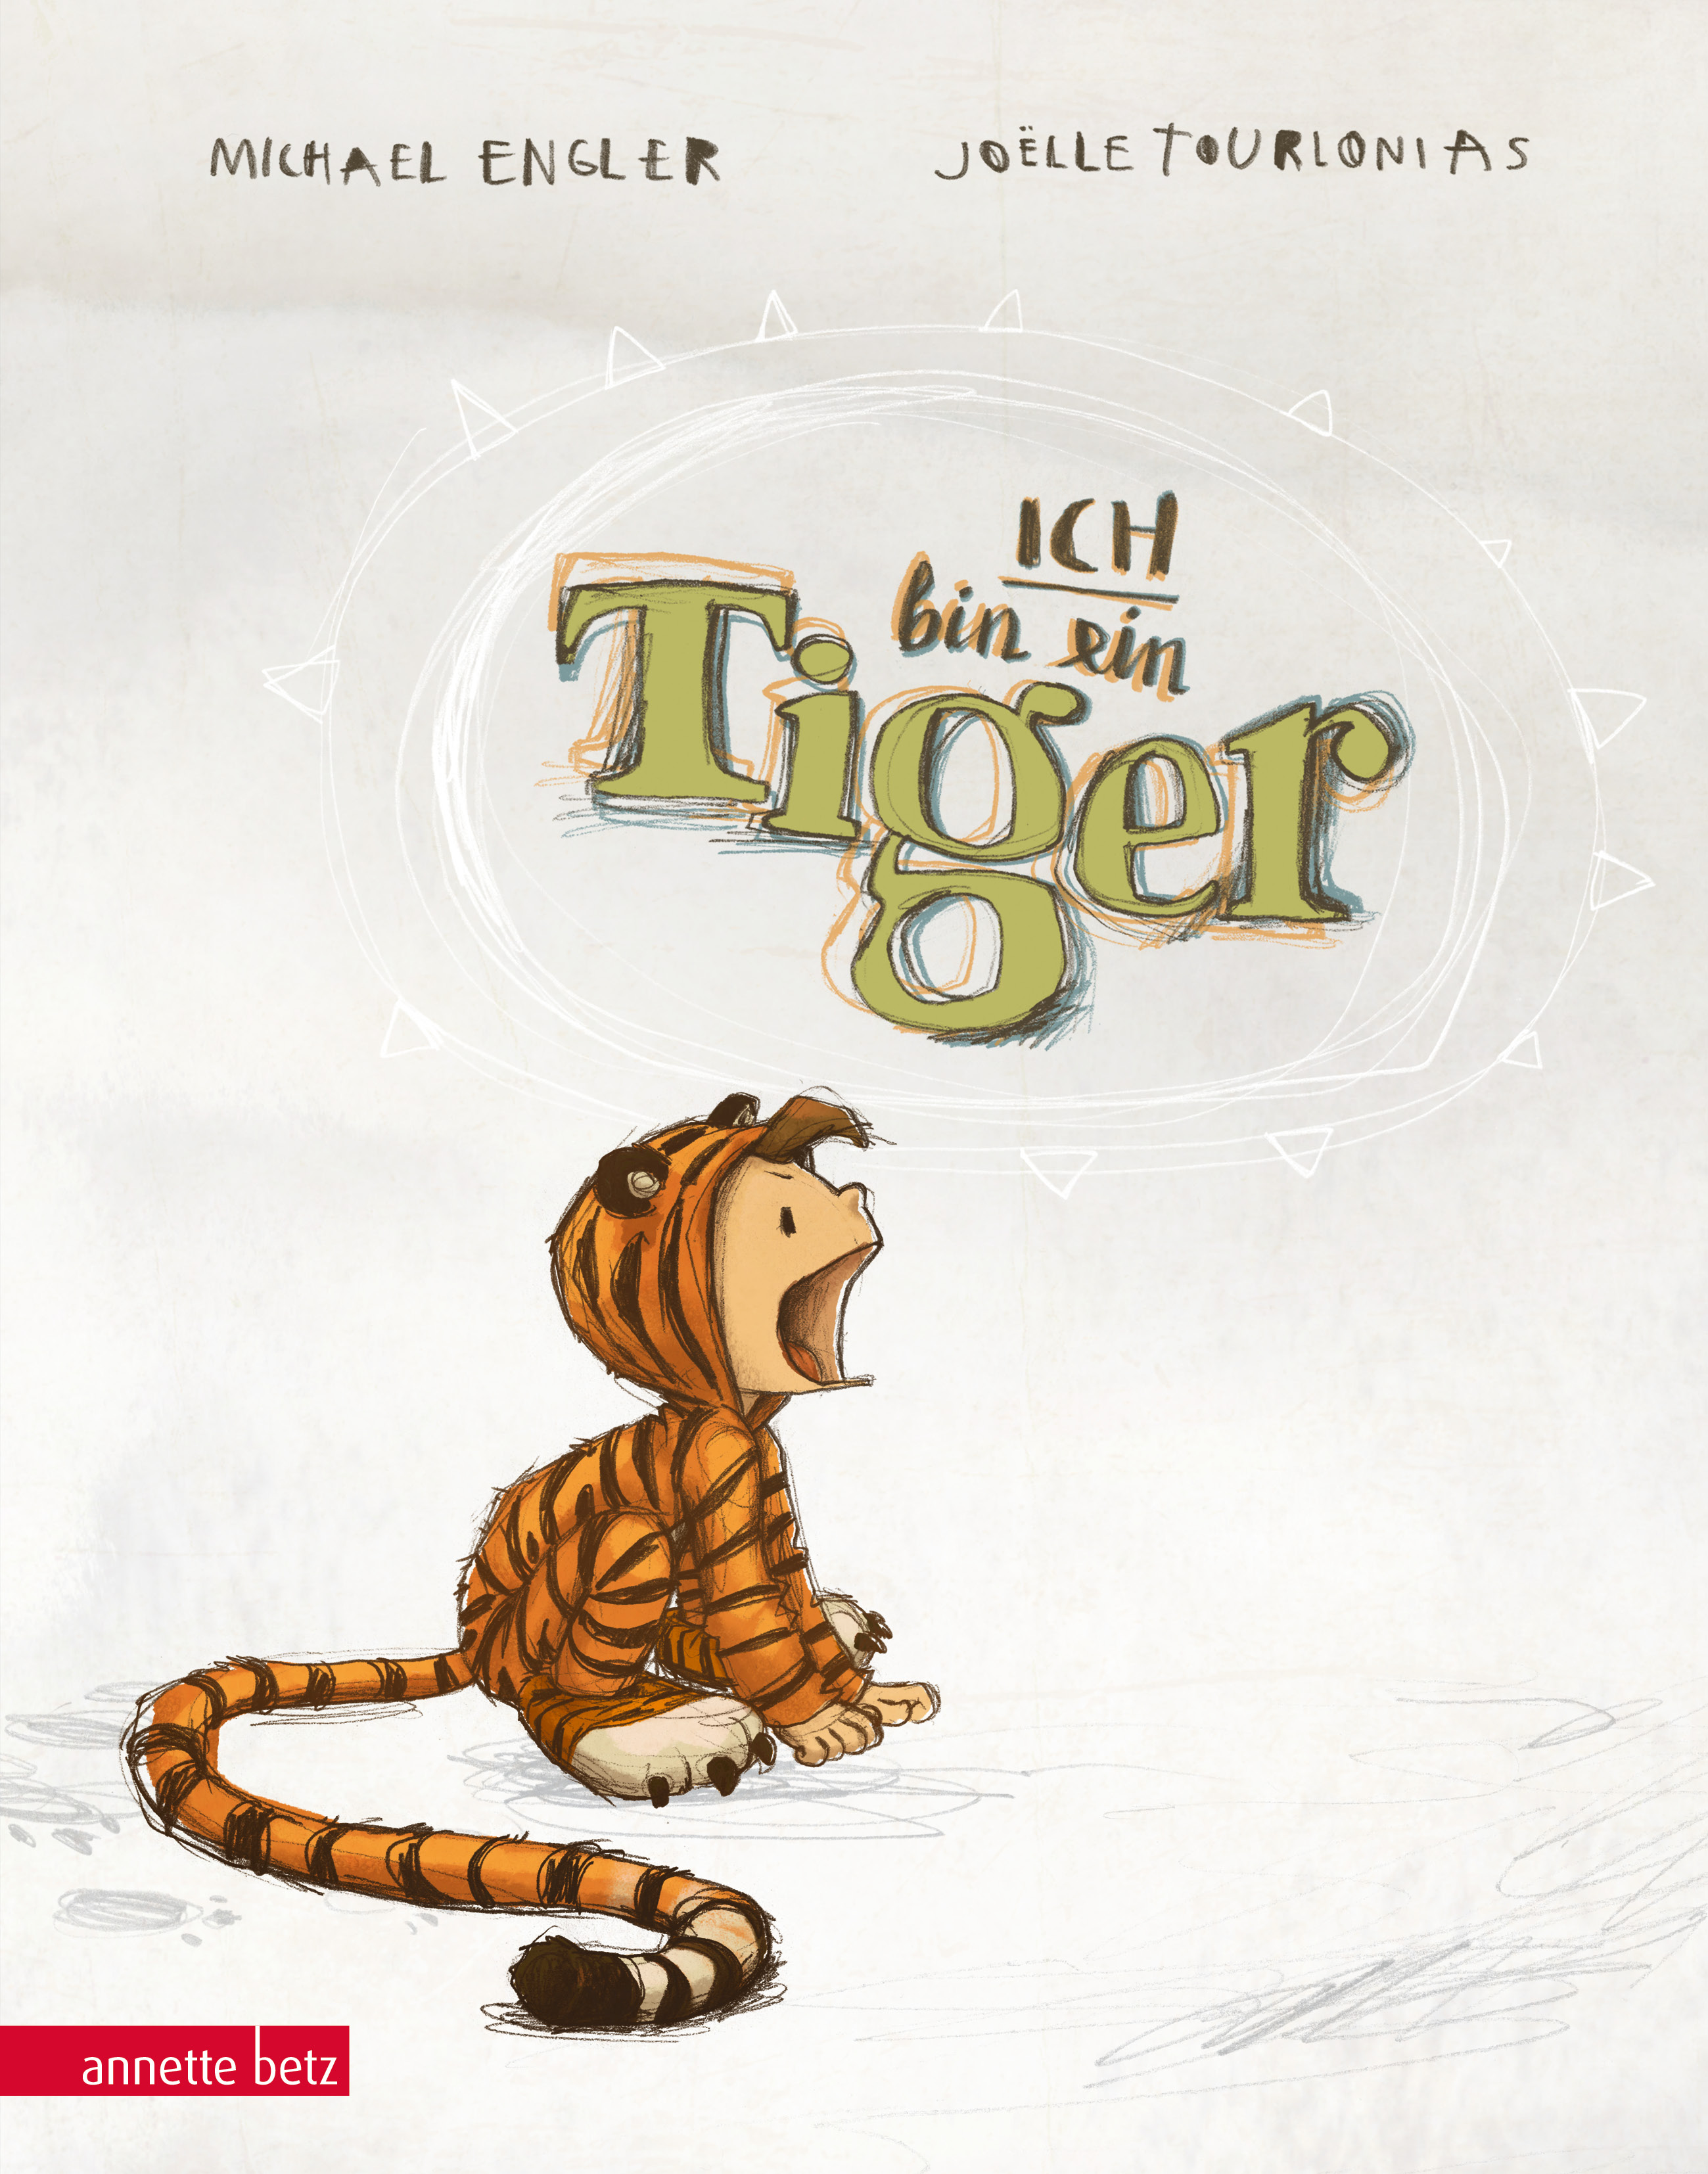 One of my new favourites – I’m a Tiger